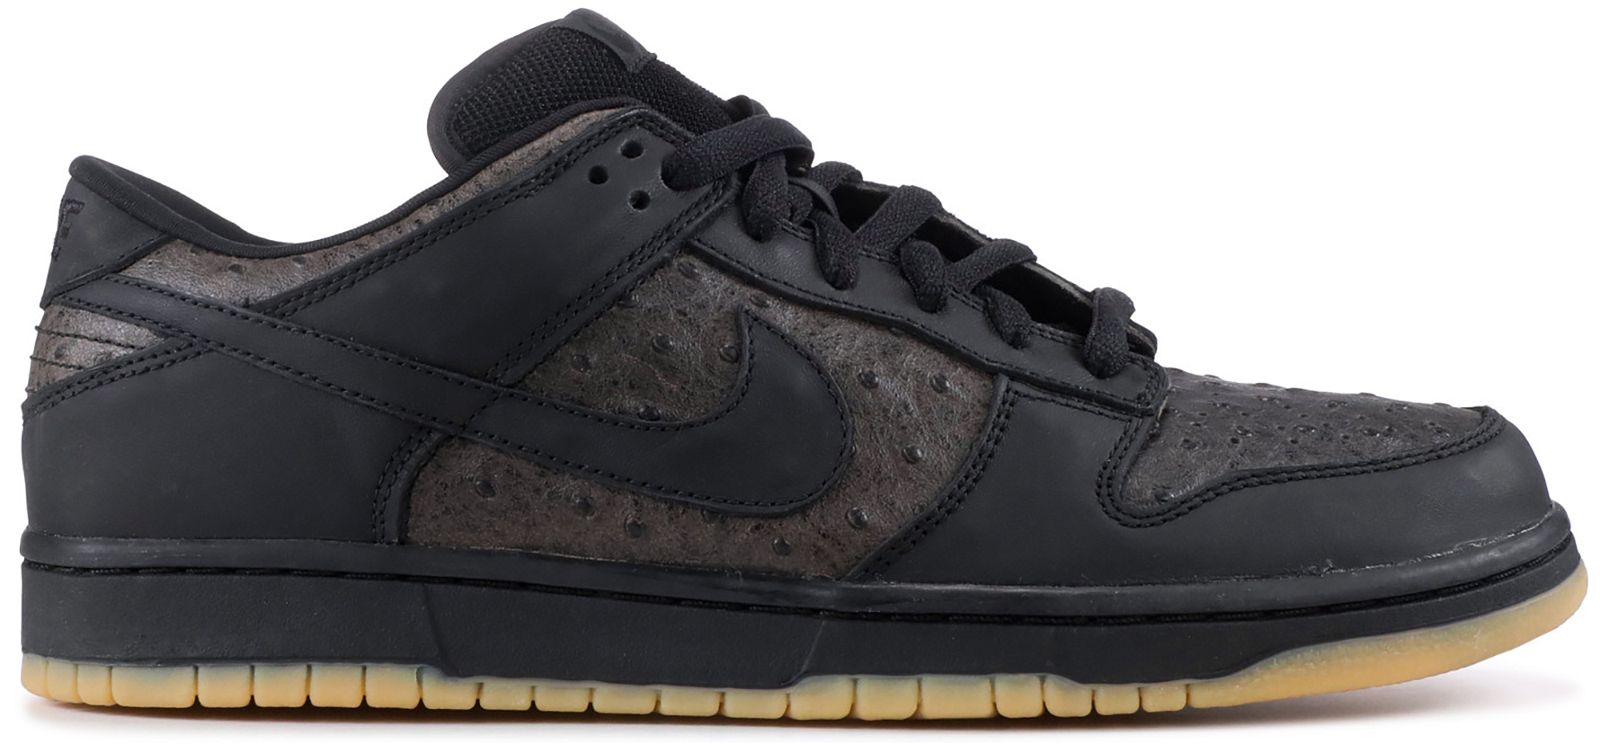 Nike SB Dunk Low Ostrich sneakers